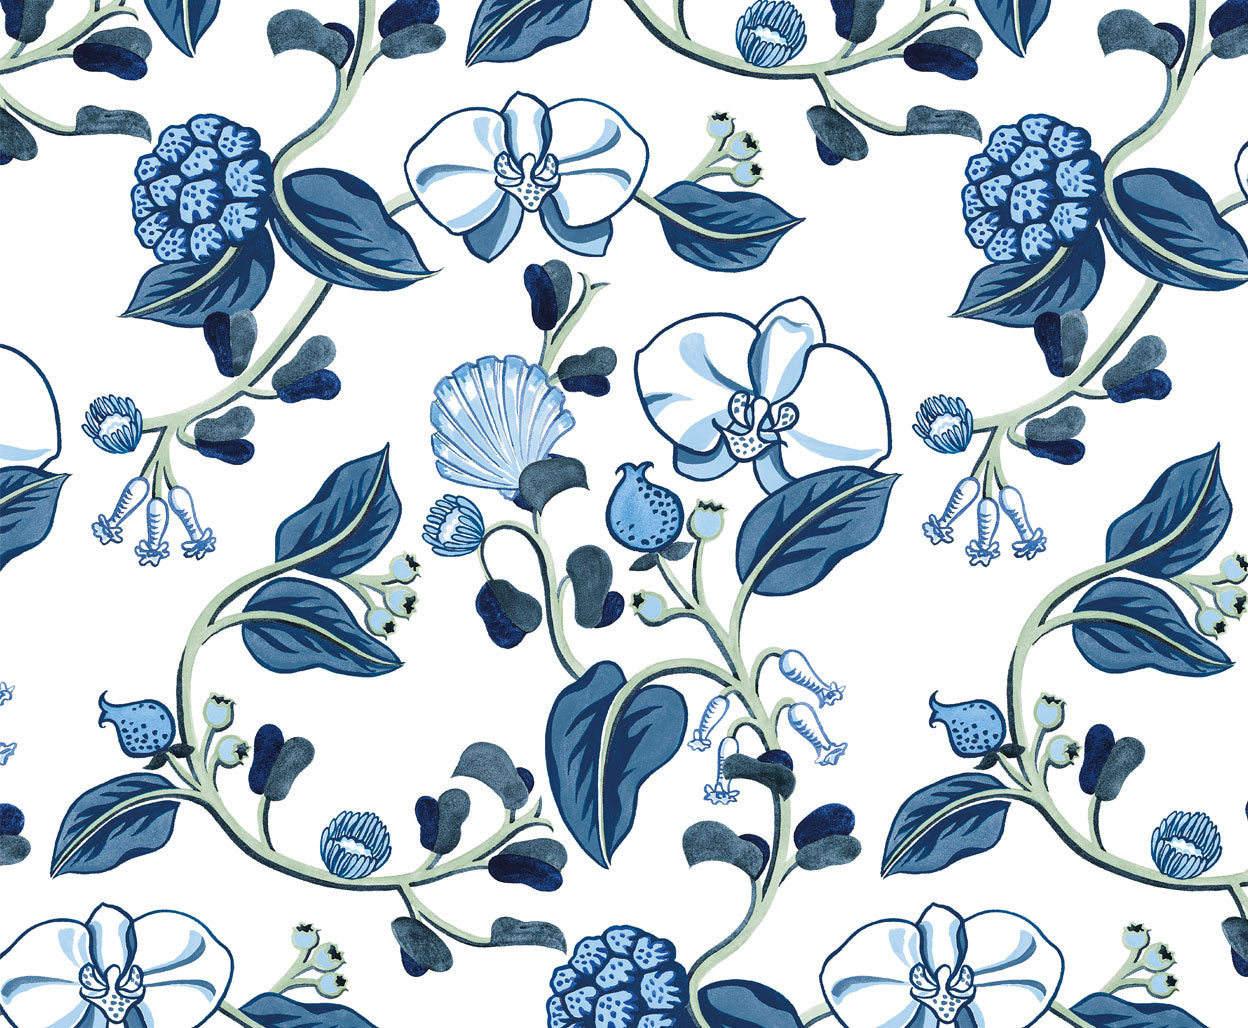 Detail of wallpaper in a varied floral print in shades of blue, green and navy on a white field.